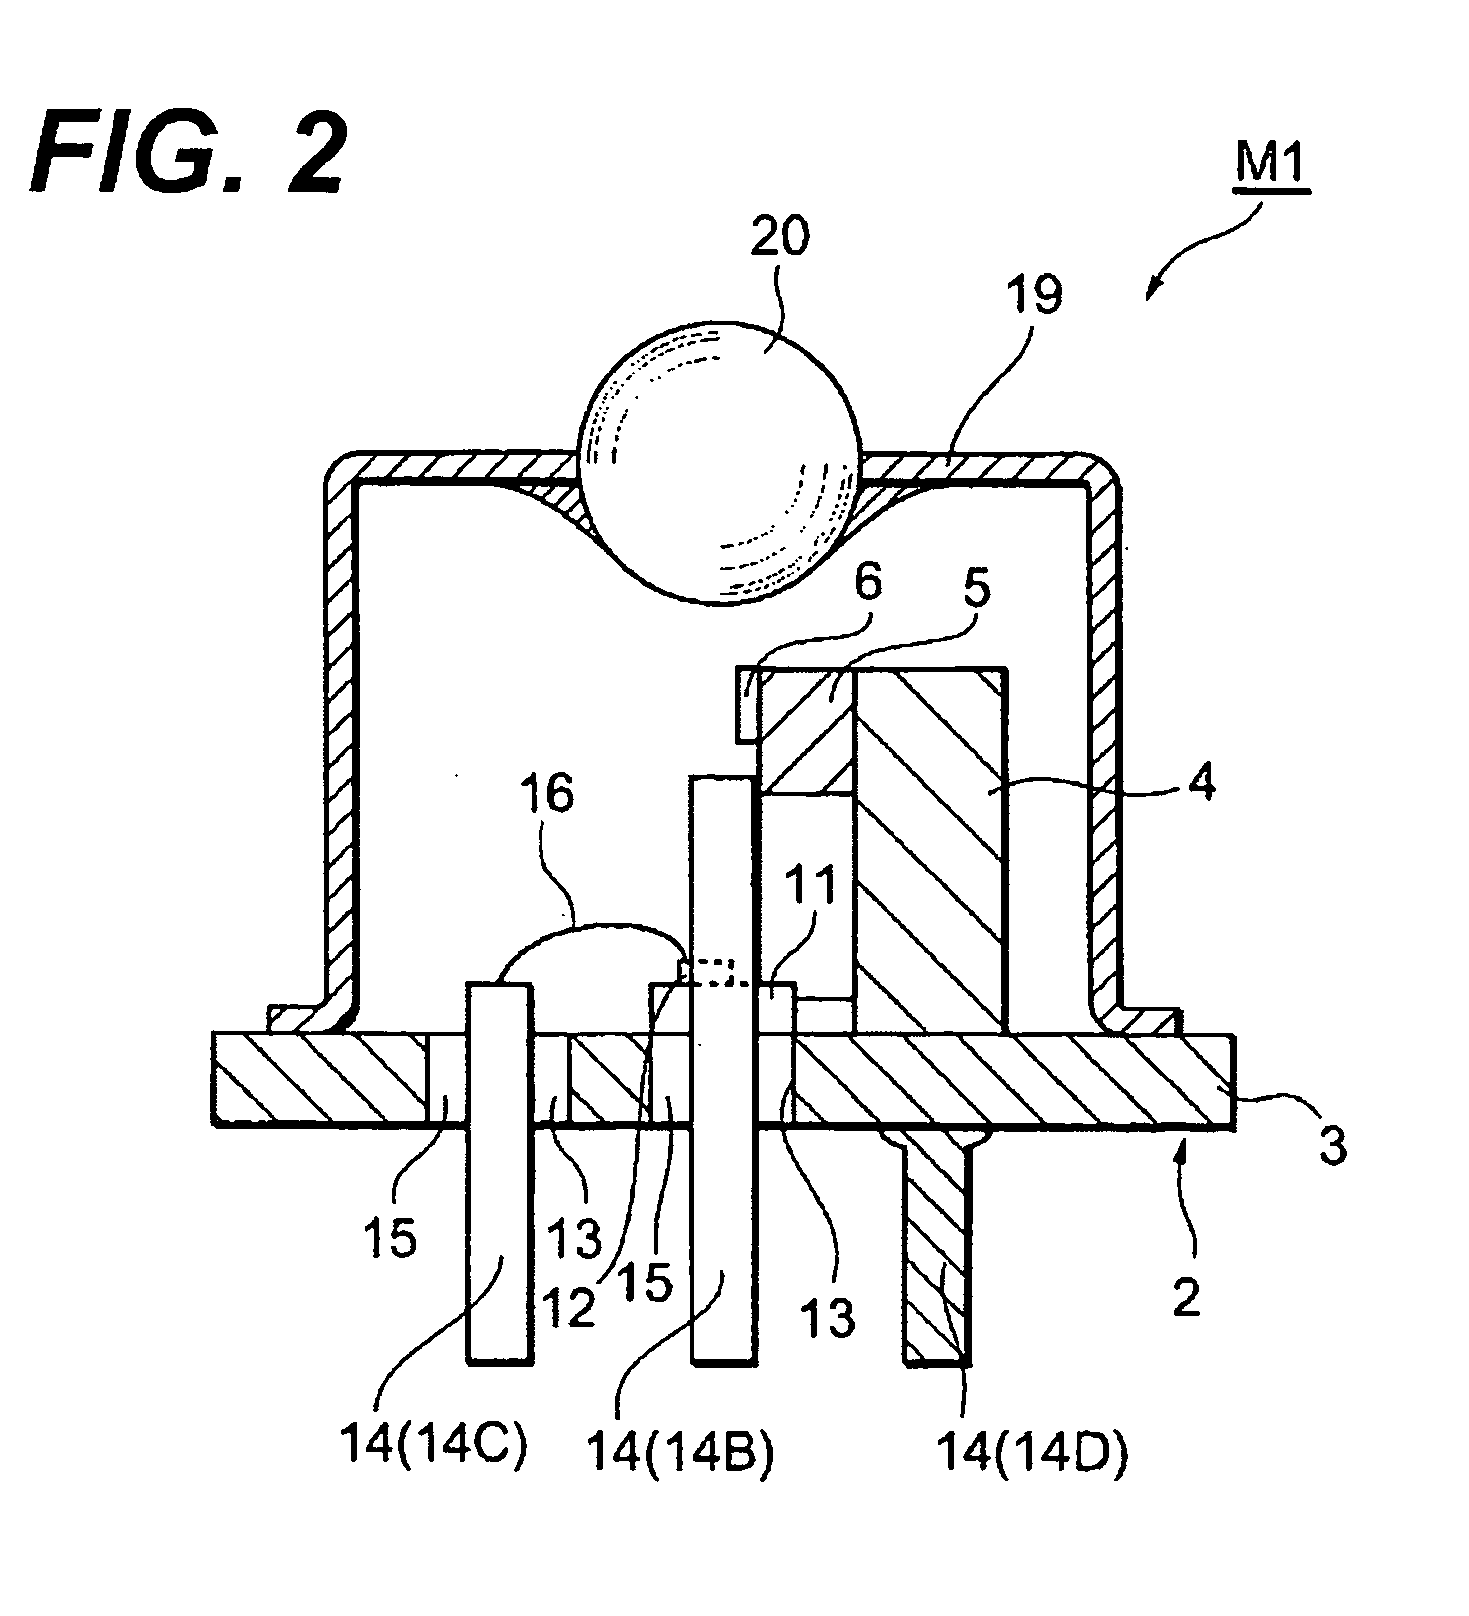 Semiconductor laser module having a co-axial package and transmission lines for complementary driving signal